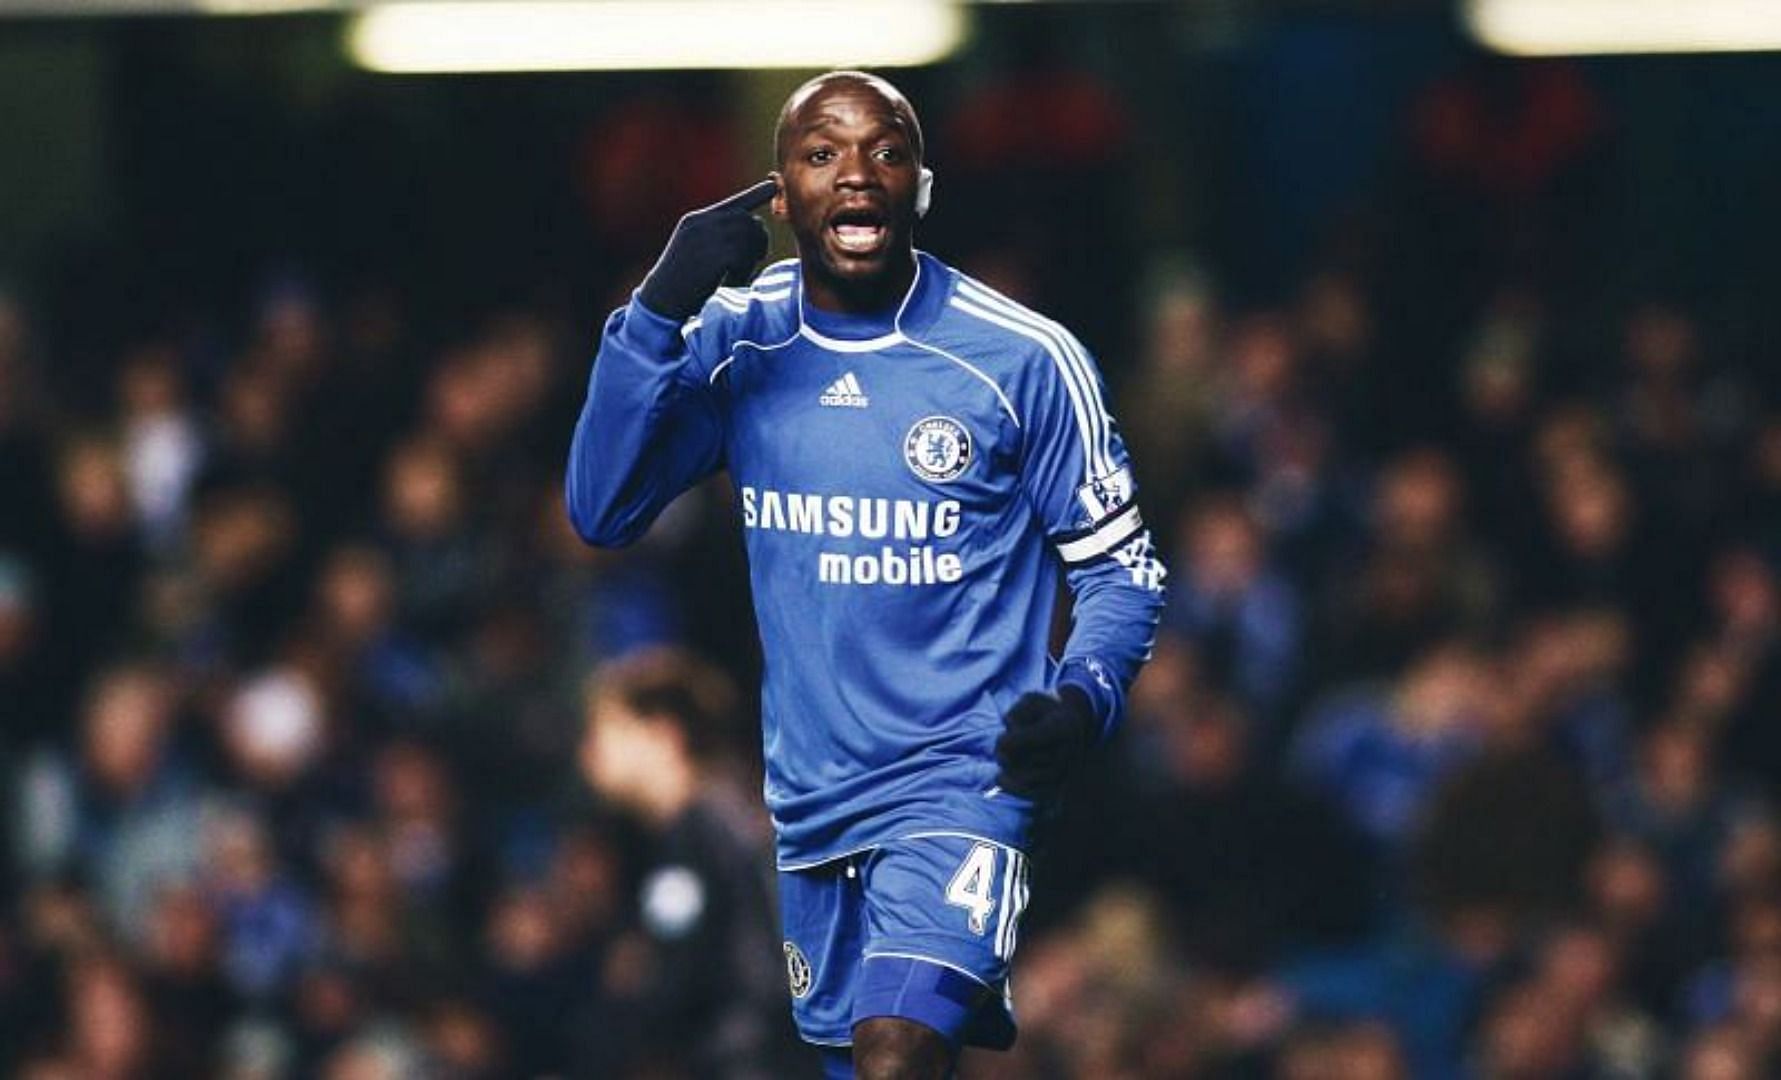 Makelele was a dominant midfield presence for Chelsea.